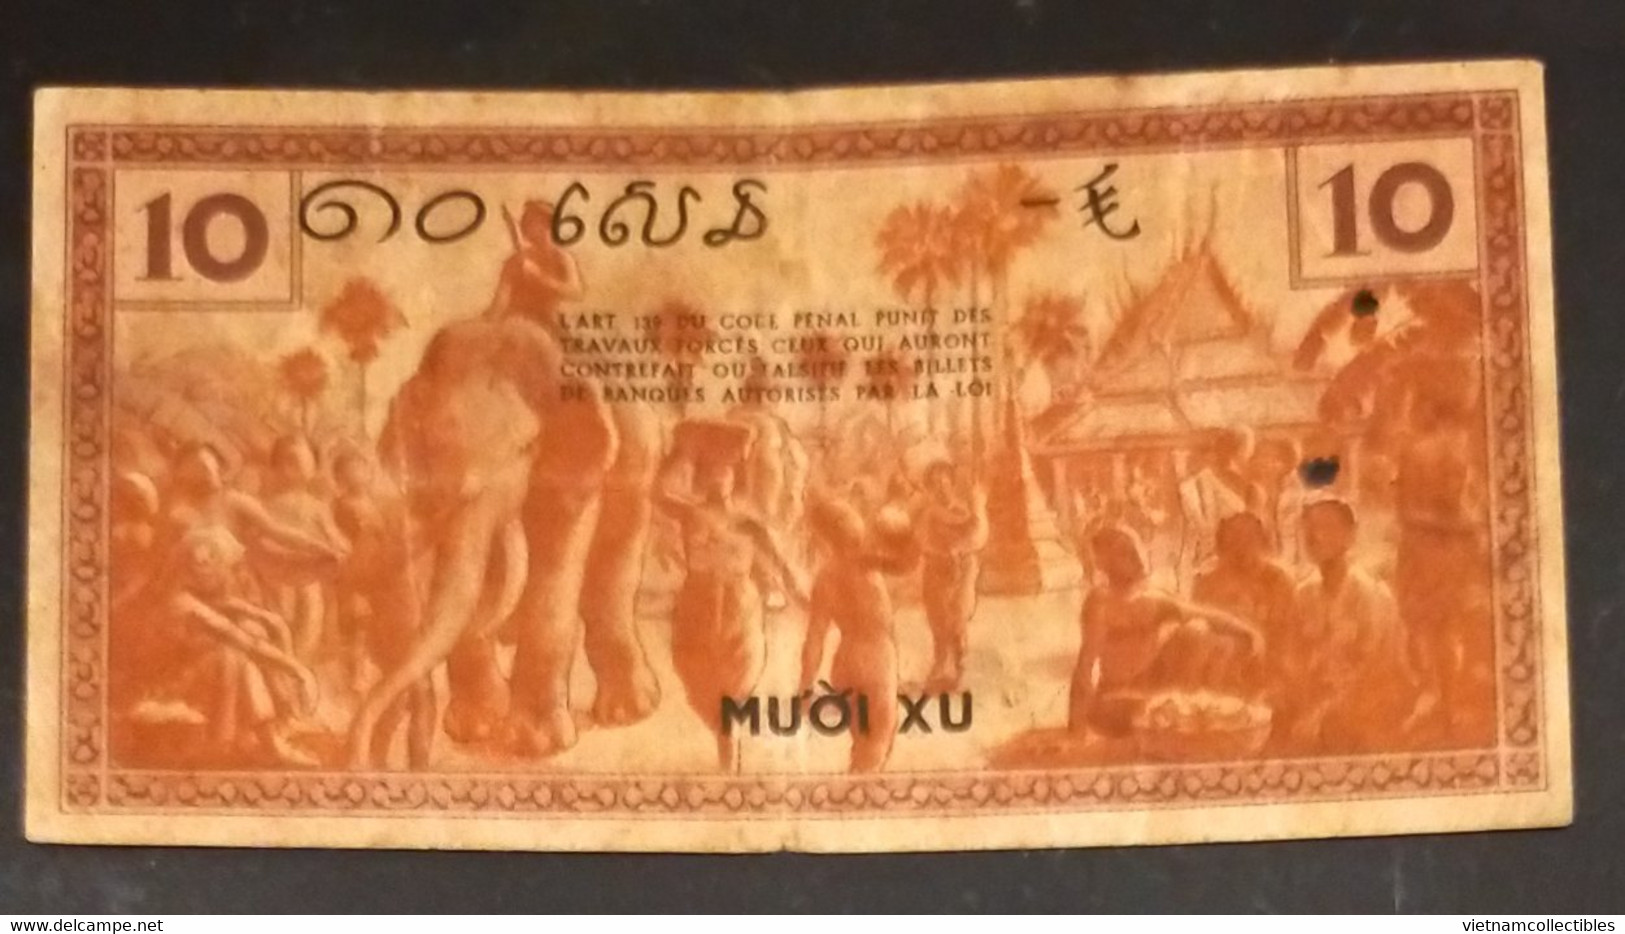 French Indochine Indochina Vietnam Viet Nam Laos Cambodia 10 Cents VF Banknote Note Billet 1939 - Pick # 85a / 02 Photos - Indocina